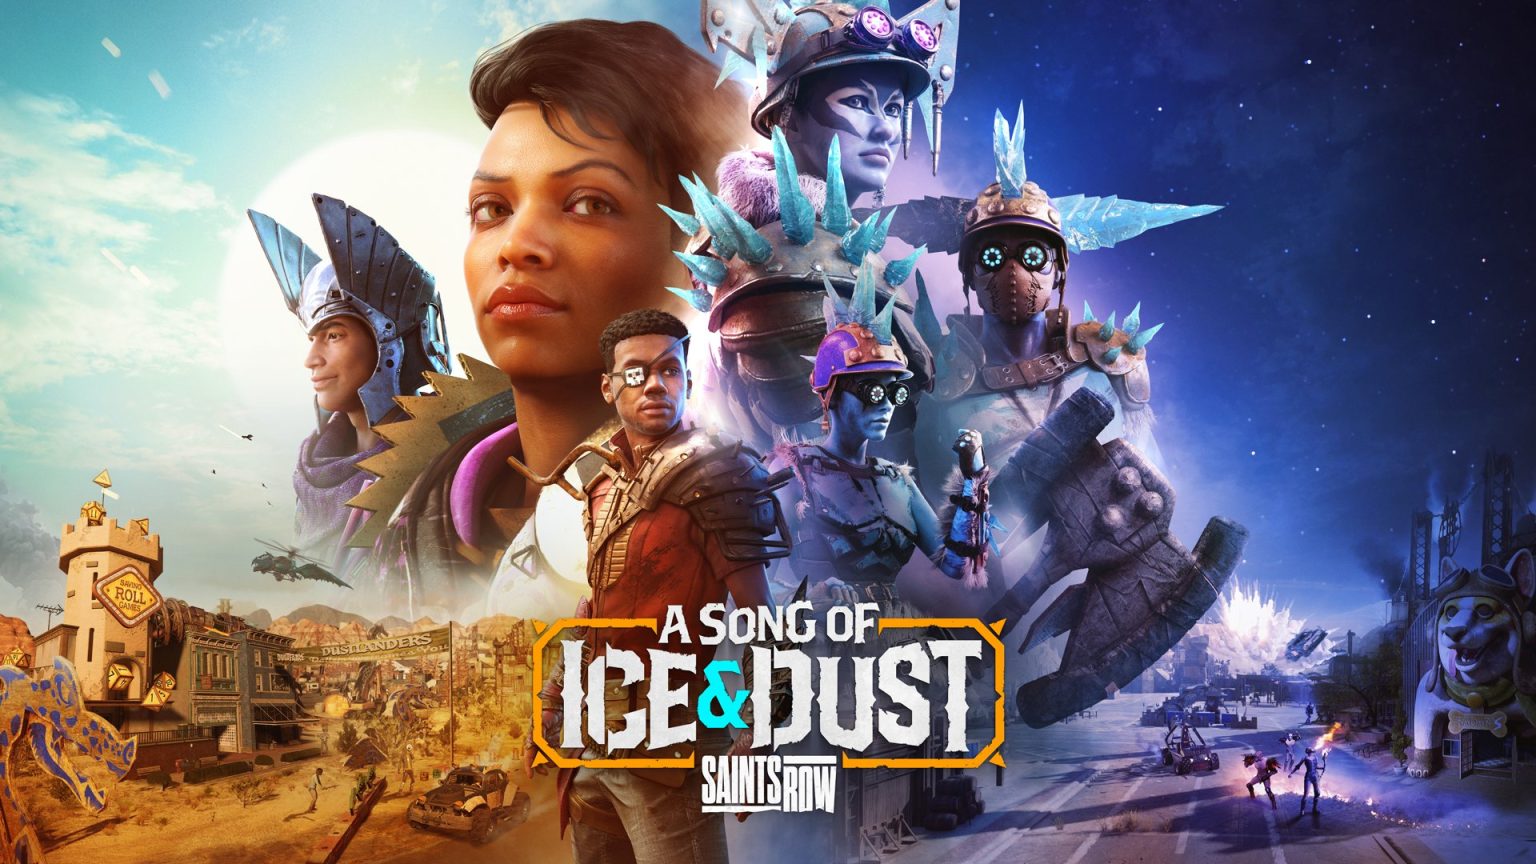 DLC-en A Song of Ice and Dust til Saints Row slippes 8. august.